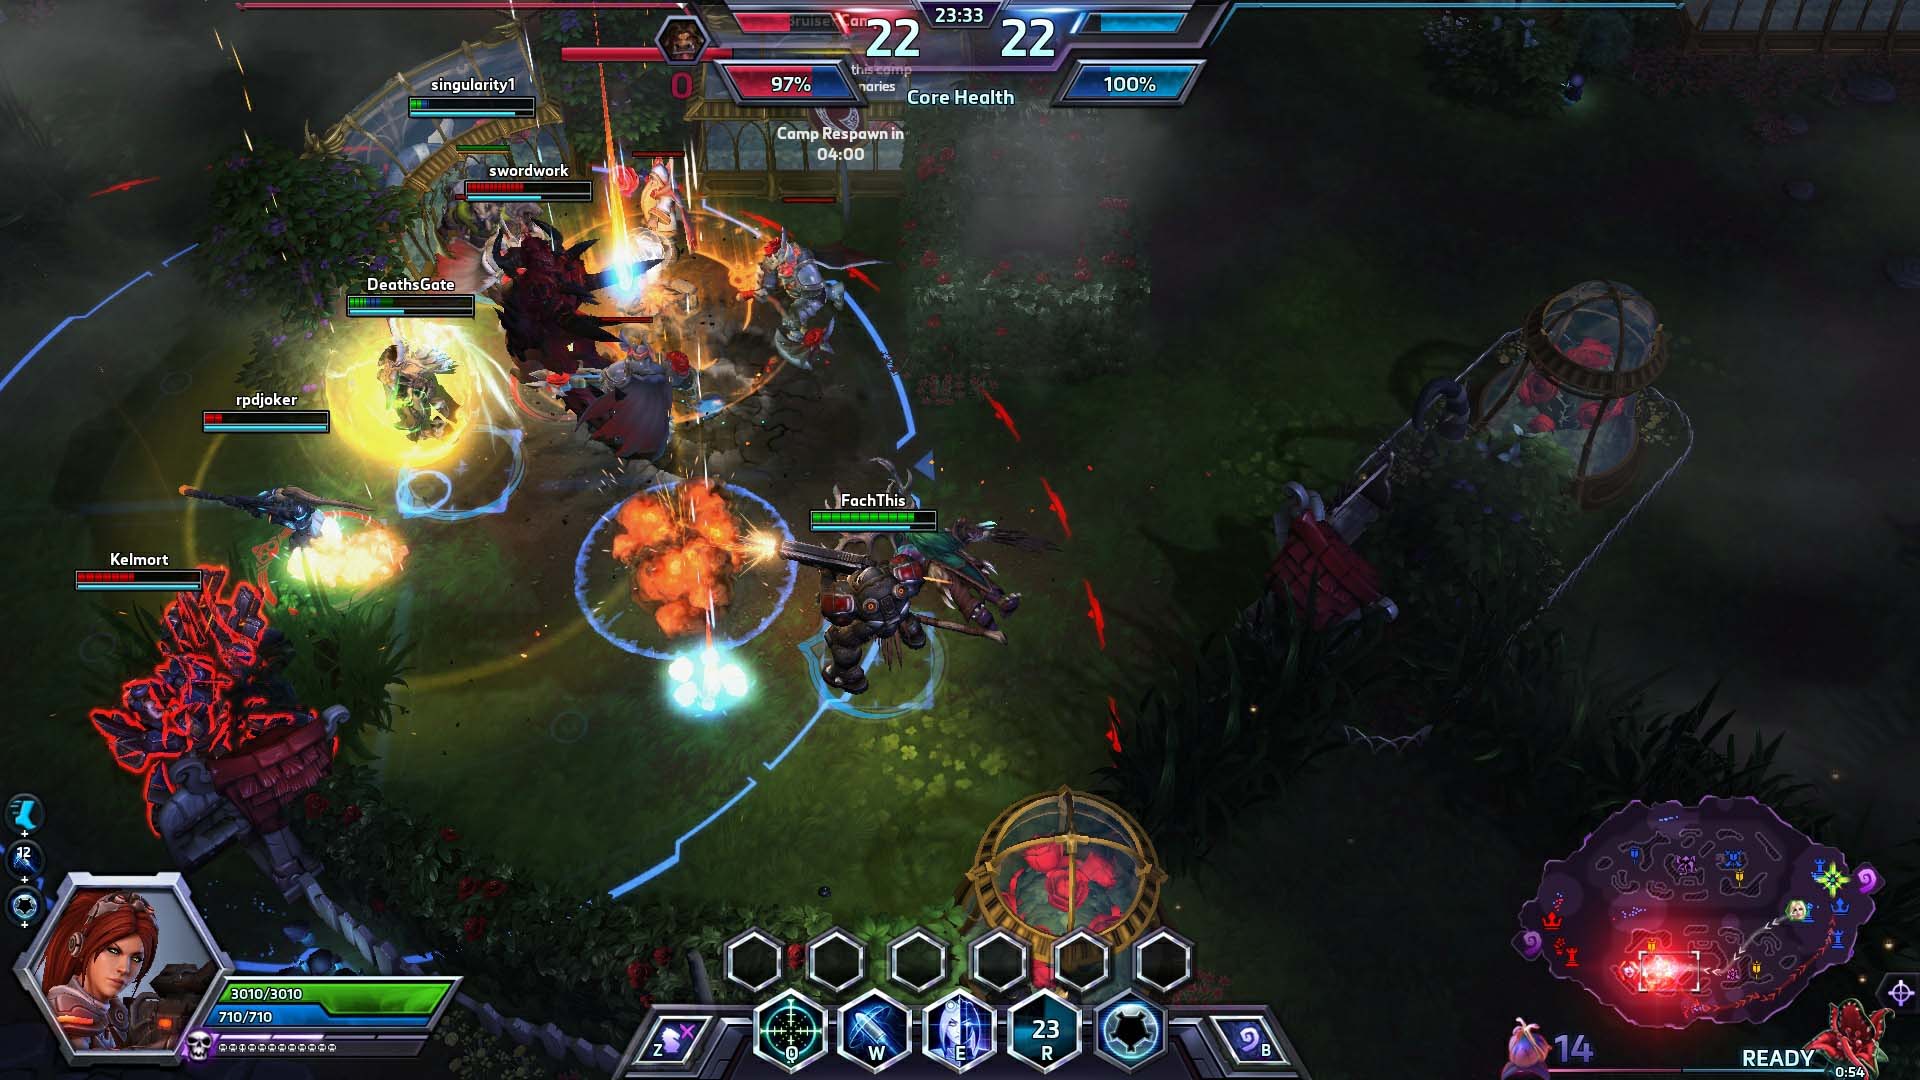 Heroes of the Storm core FachThis swordwork singularity1 DeathsGate